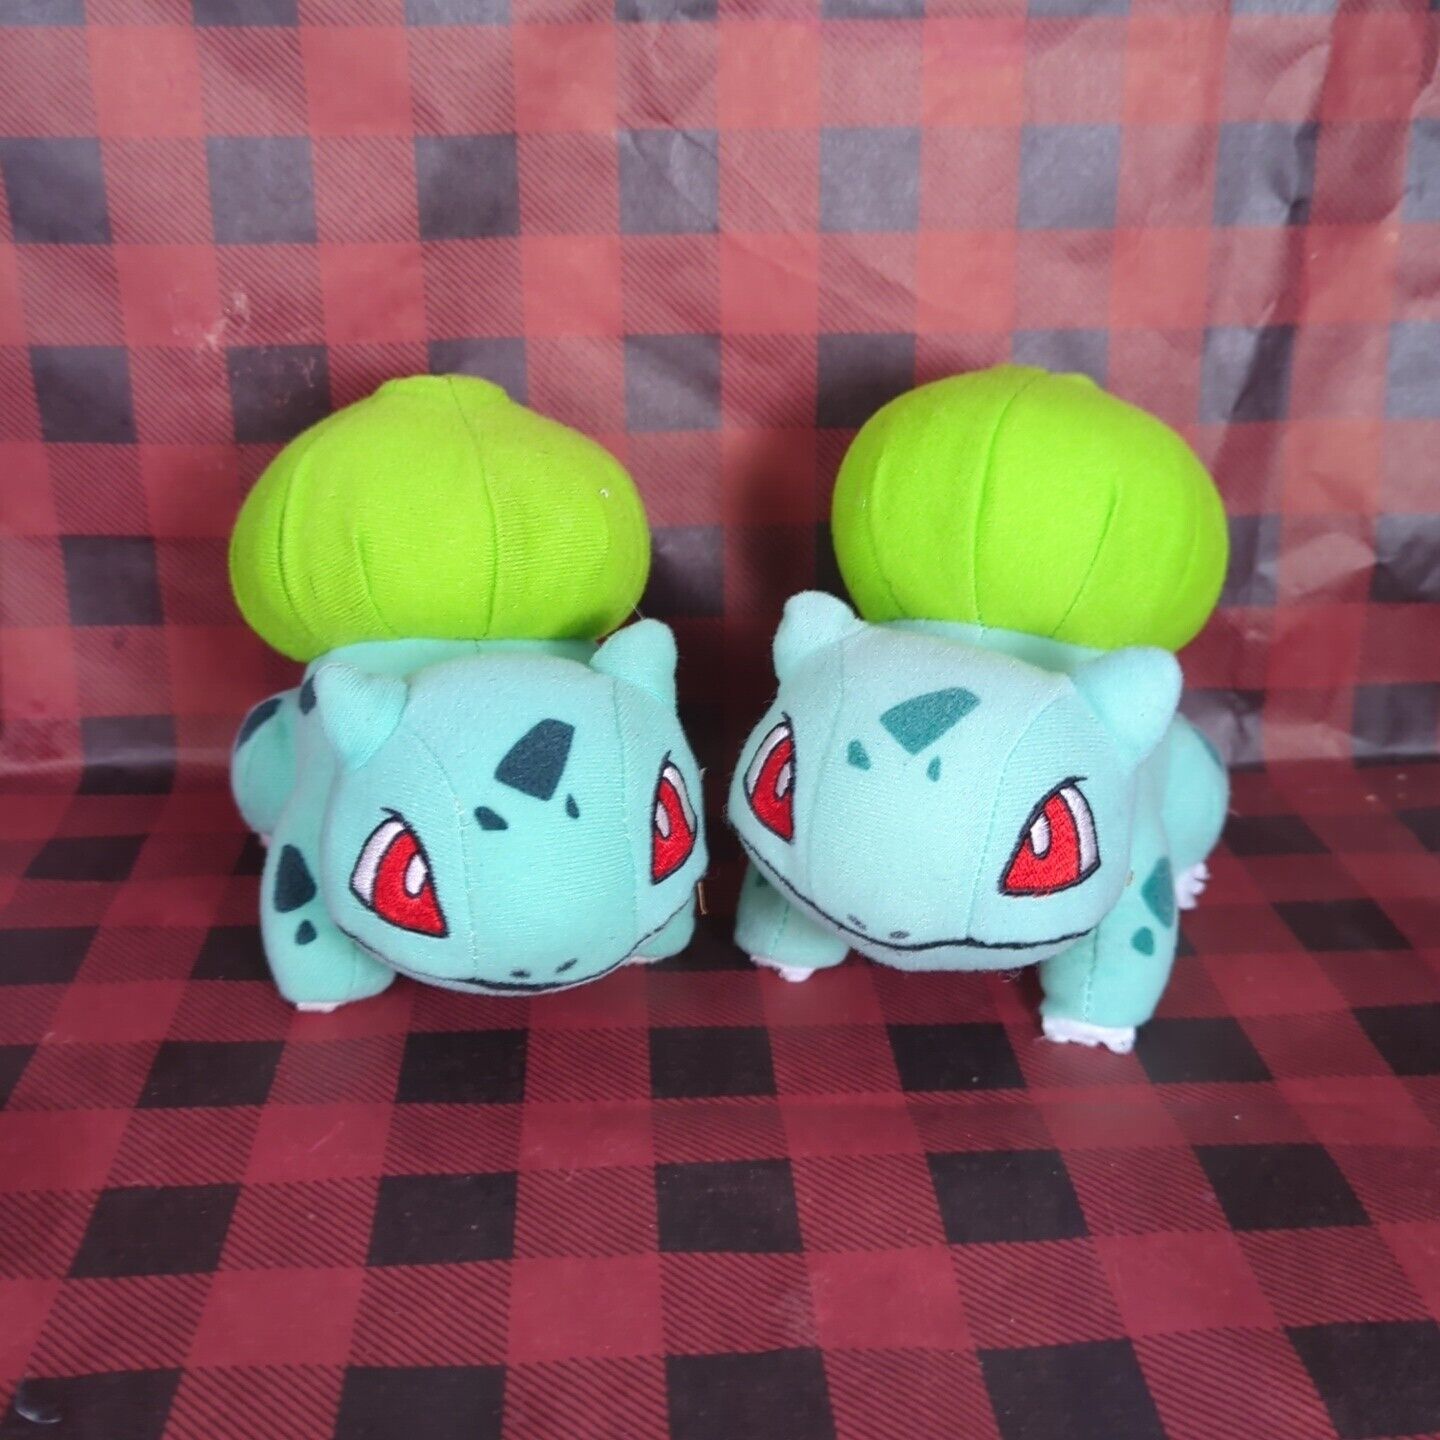 Log Of 2 Bulbasaur Plush Toy Factory Stuffed Animals No Hanging Tags